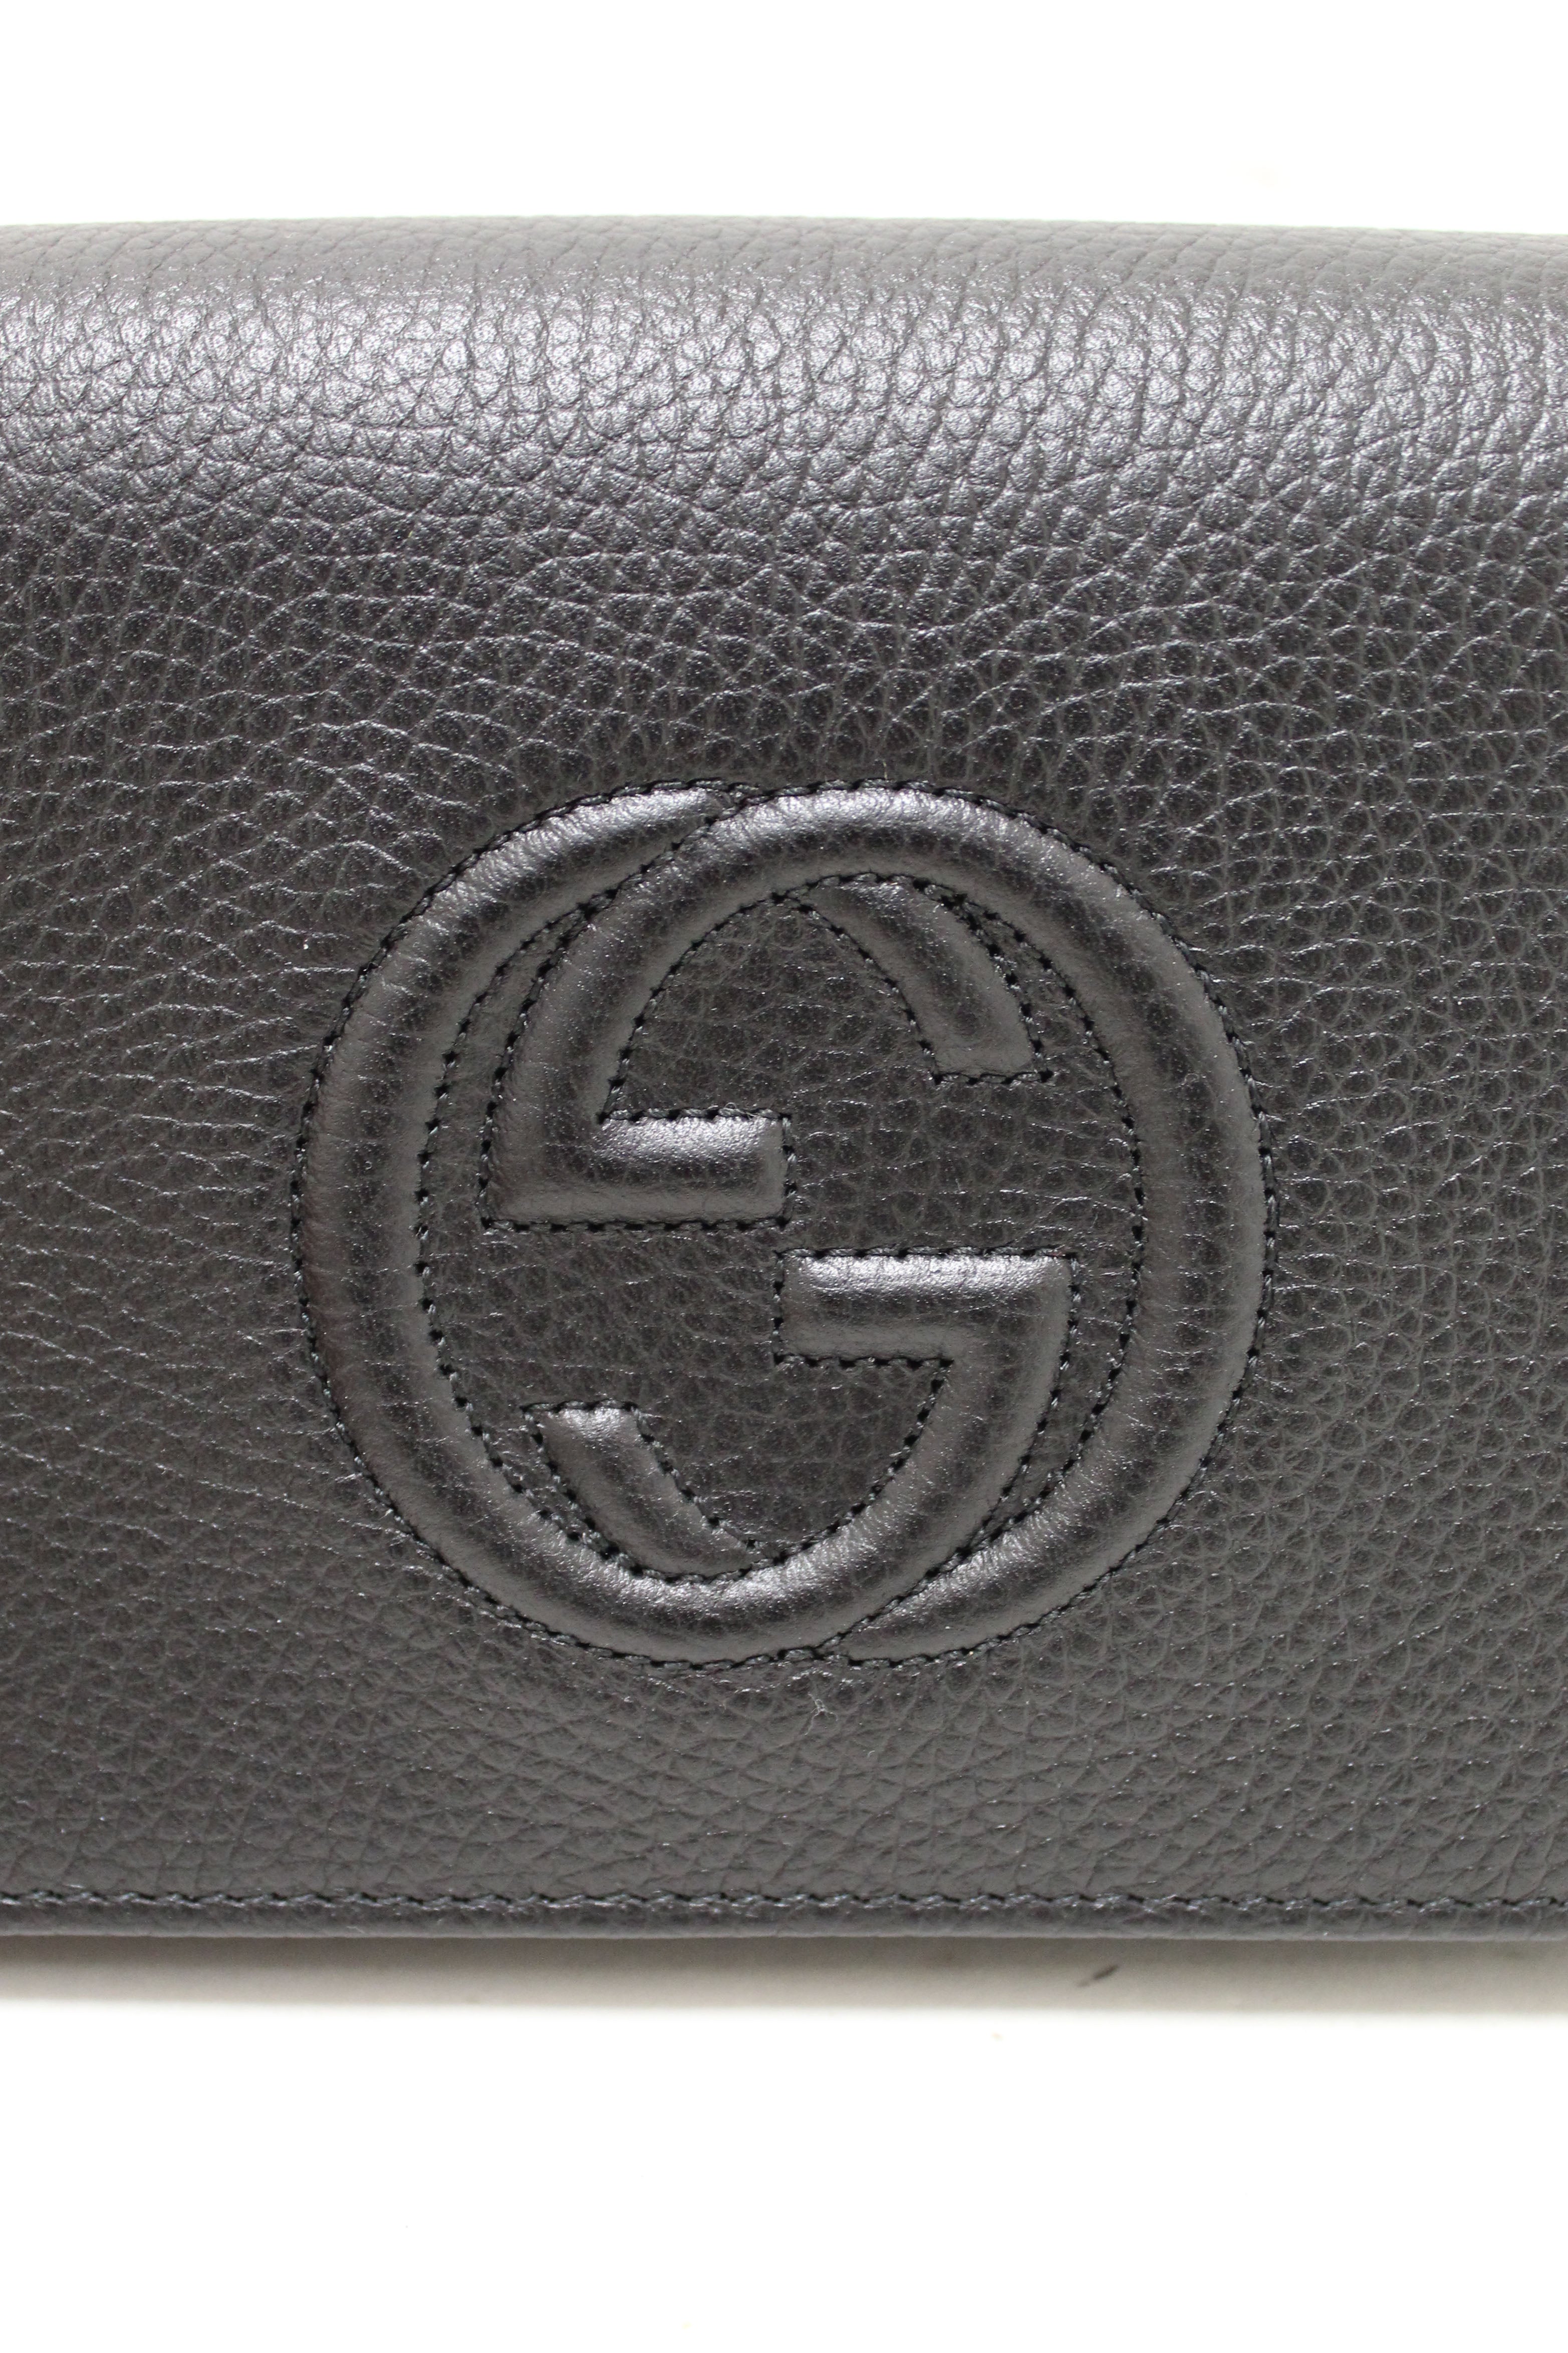 NEW Authentic Gucci Black Soho Disco Leather Wallet On Chain Cross Body Bag